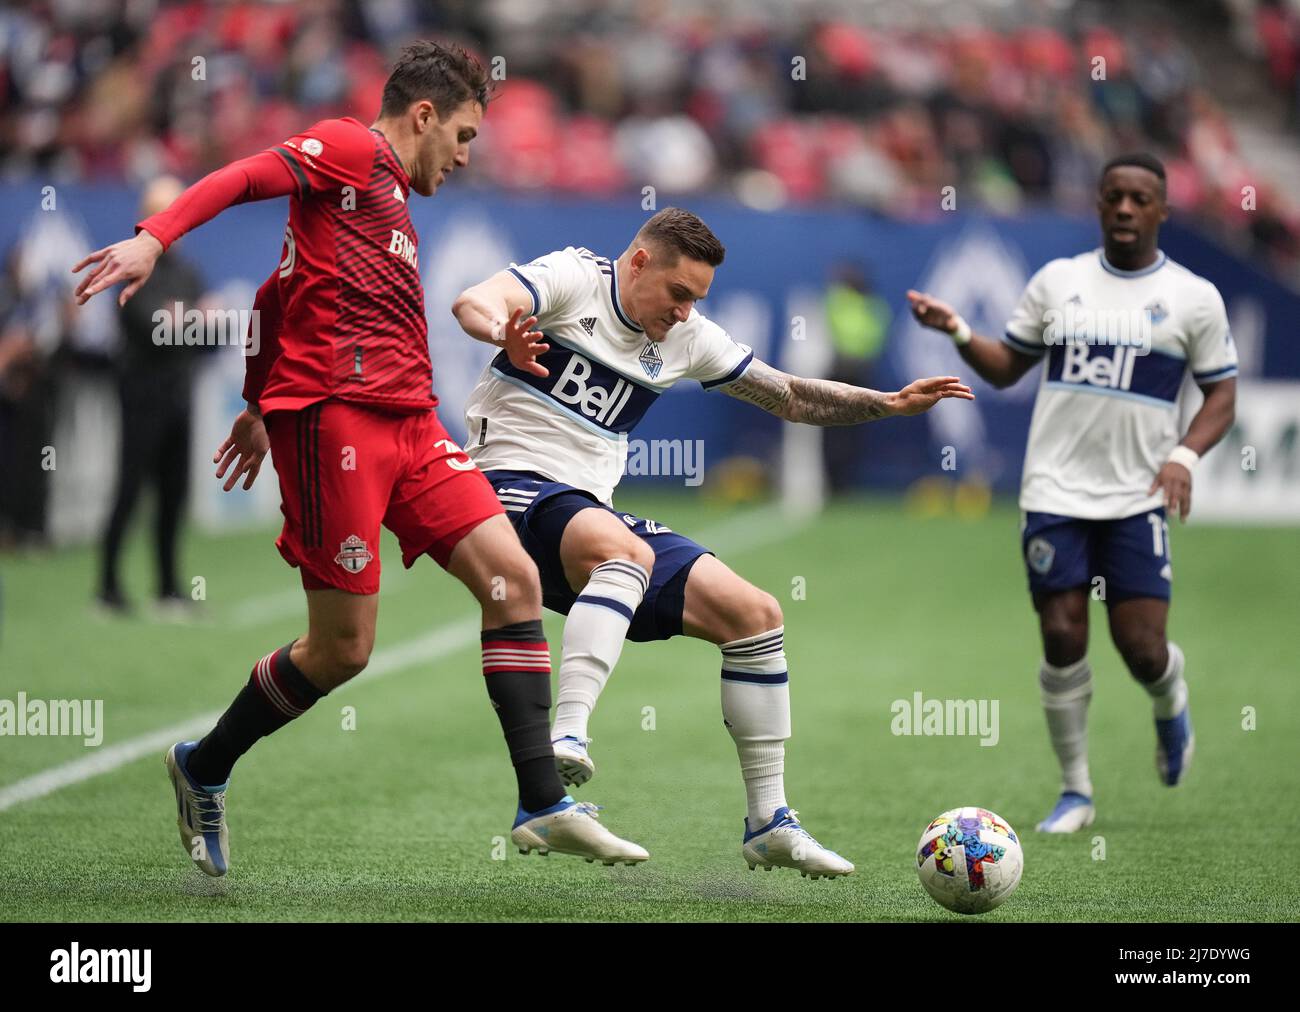 May 8, 2022, VANCOUVER, BC, CANADA: Vancouver Whitecaps goalkeeper Thomas  Hasal celebrates after stopping Toronto FC's Alejandro Pozuelo on a penalty  kick during the first half of an MLS soccer game in